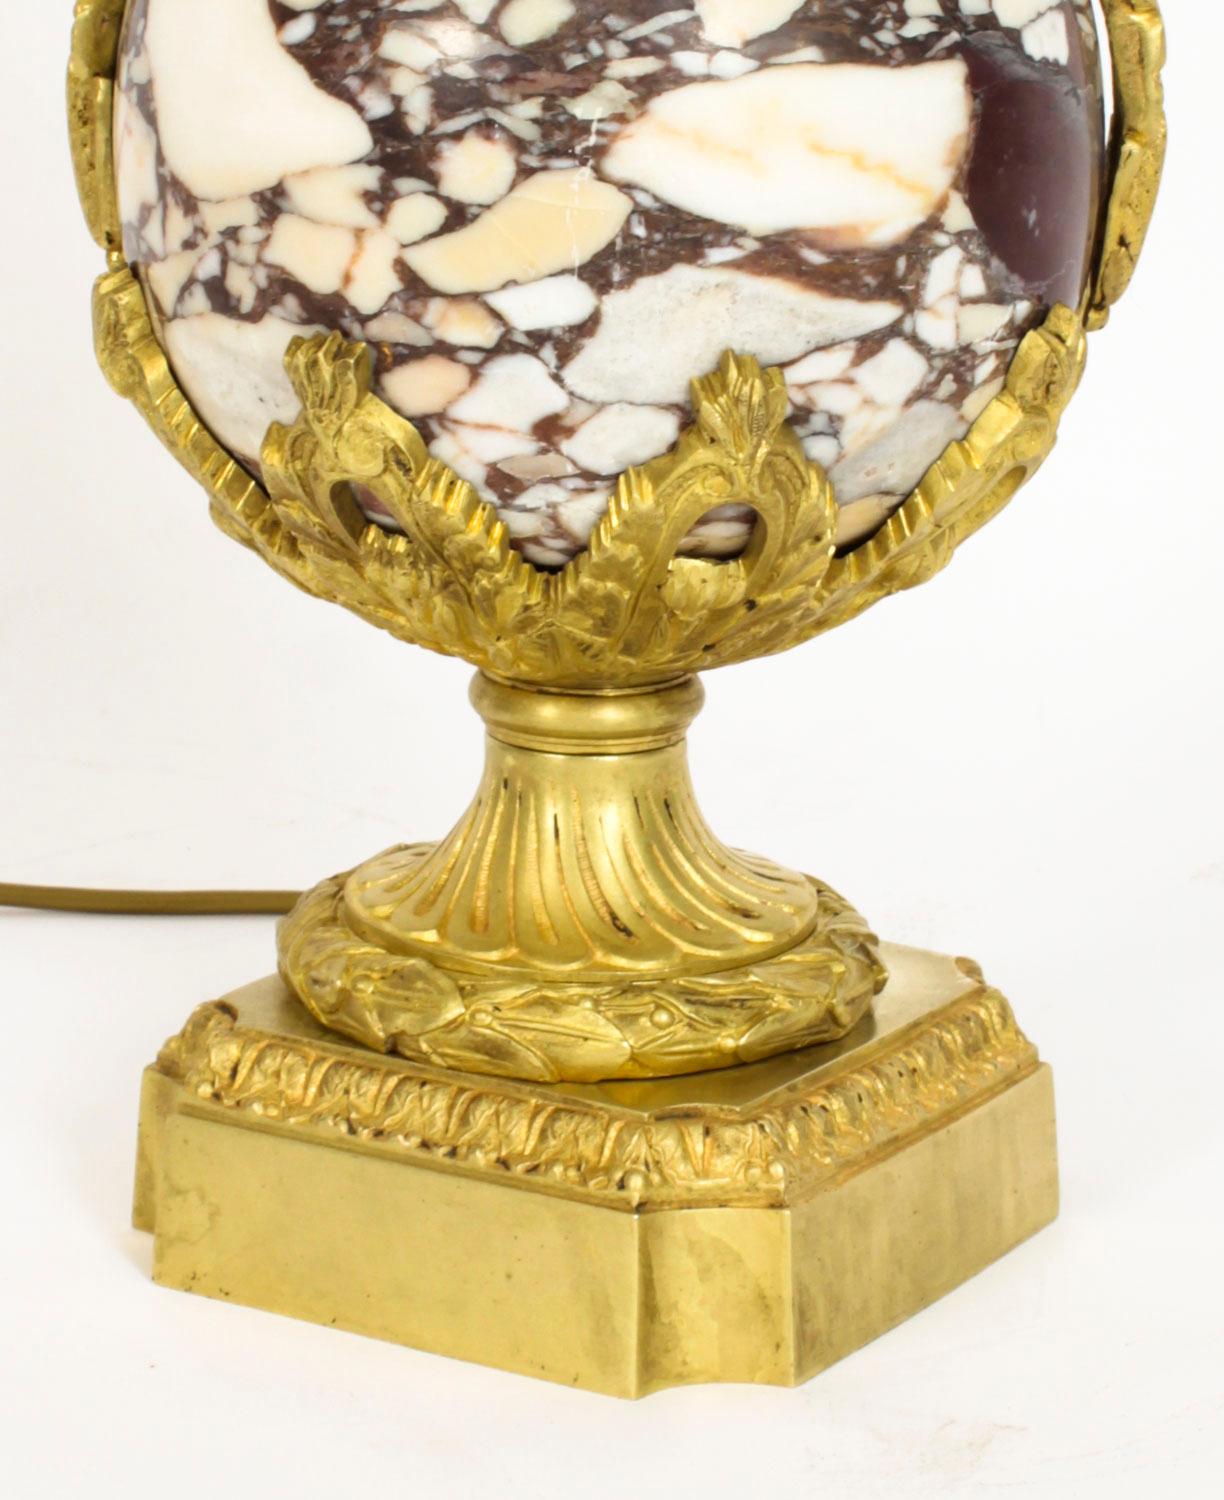 Antique French Louis XVI Revival Ormolu Mounted Marble Table Lamp 1860s For Sale 4